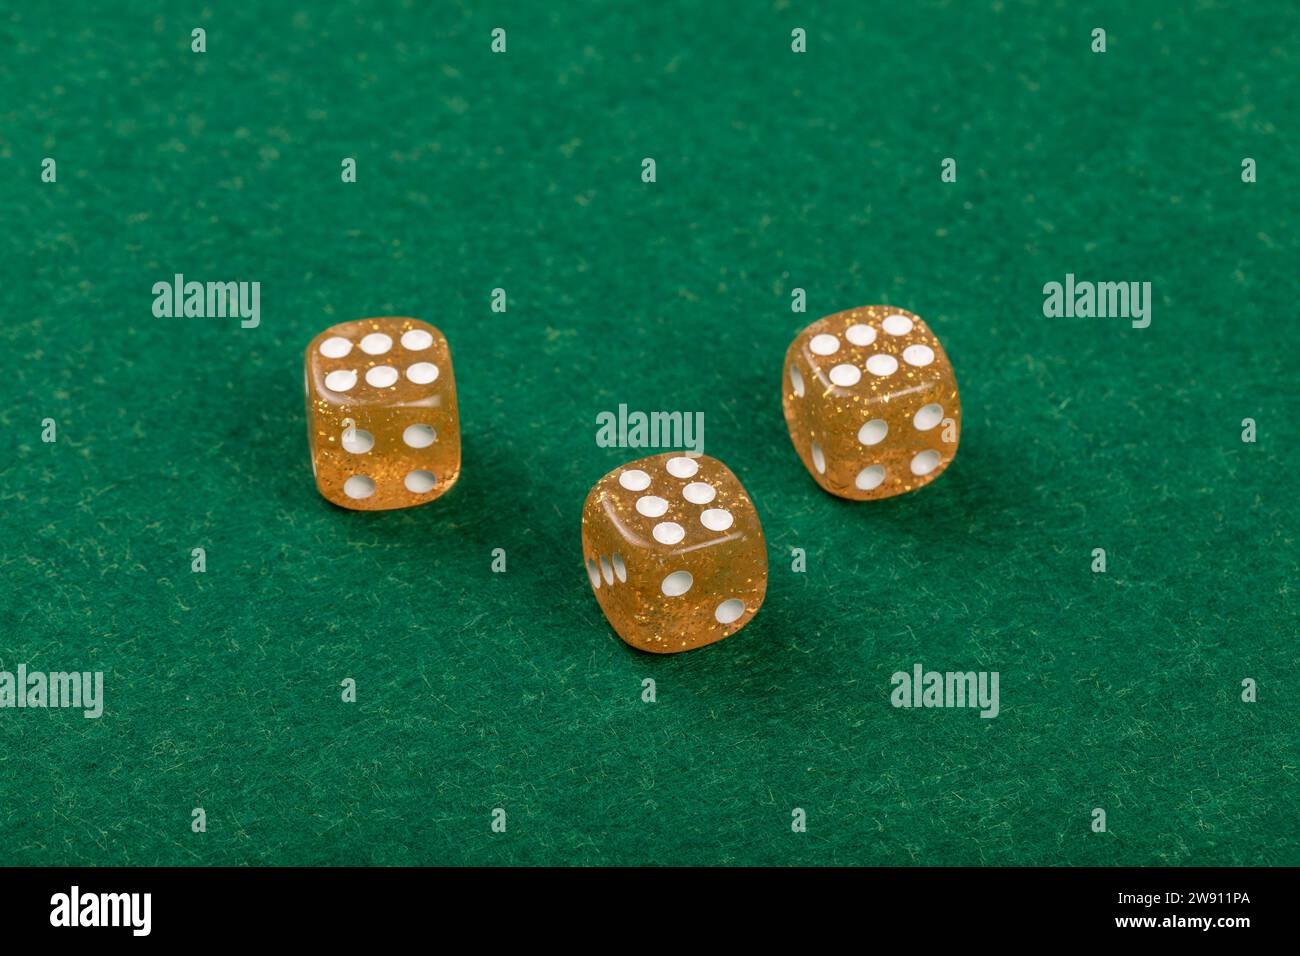 Three Yellow Dice on Green Velvet Casino Table for Gaming and Gambling Stock Photo